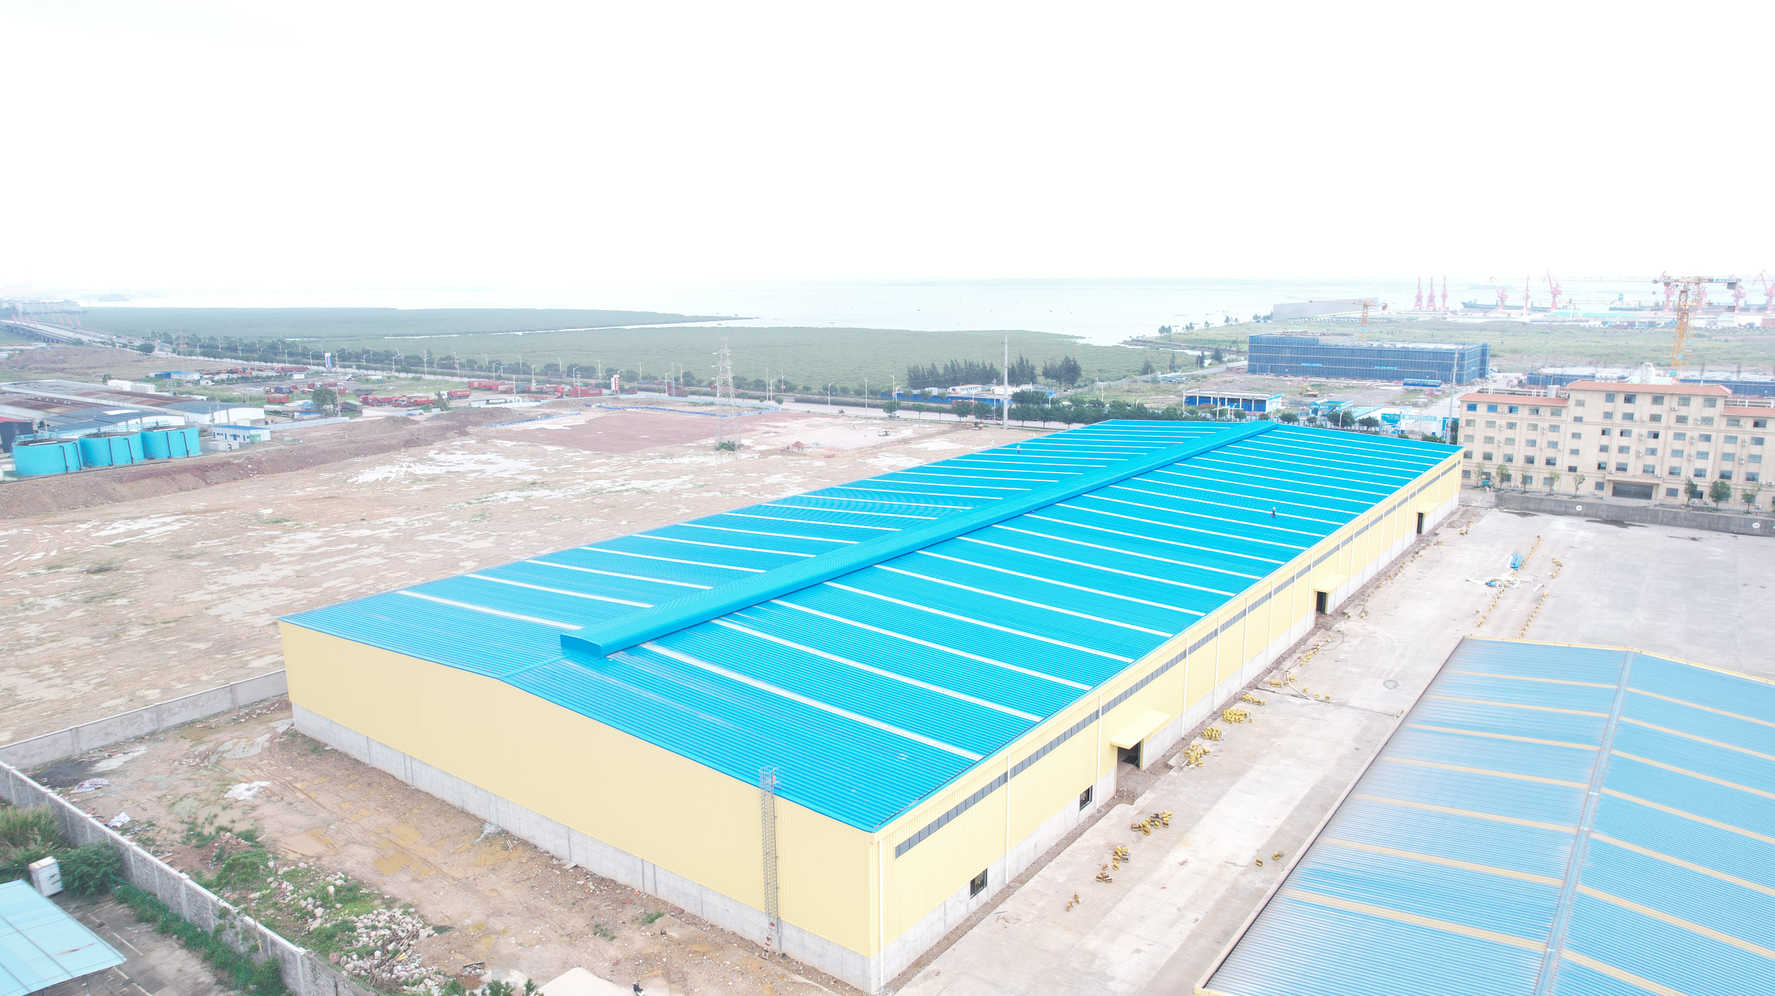 The project is steadily advancing! The construction milestones of the Fangchenggang Anpaida Warehouse Base project have been successfully completed